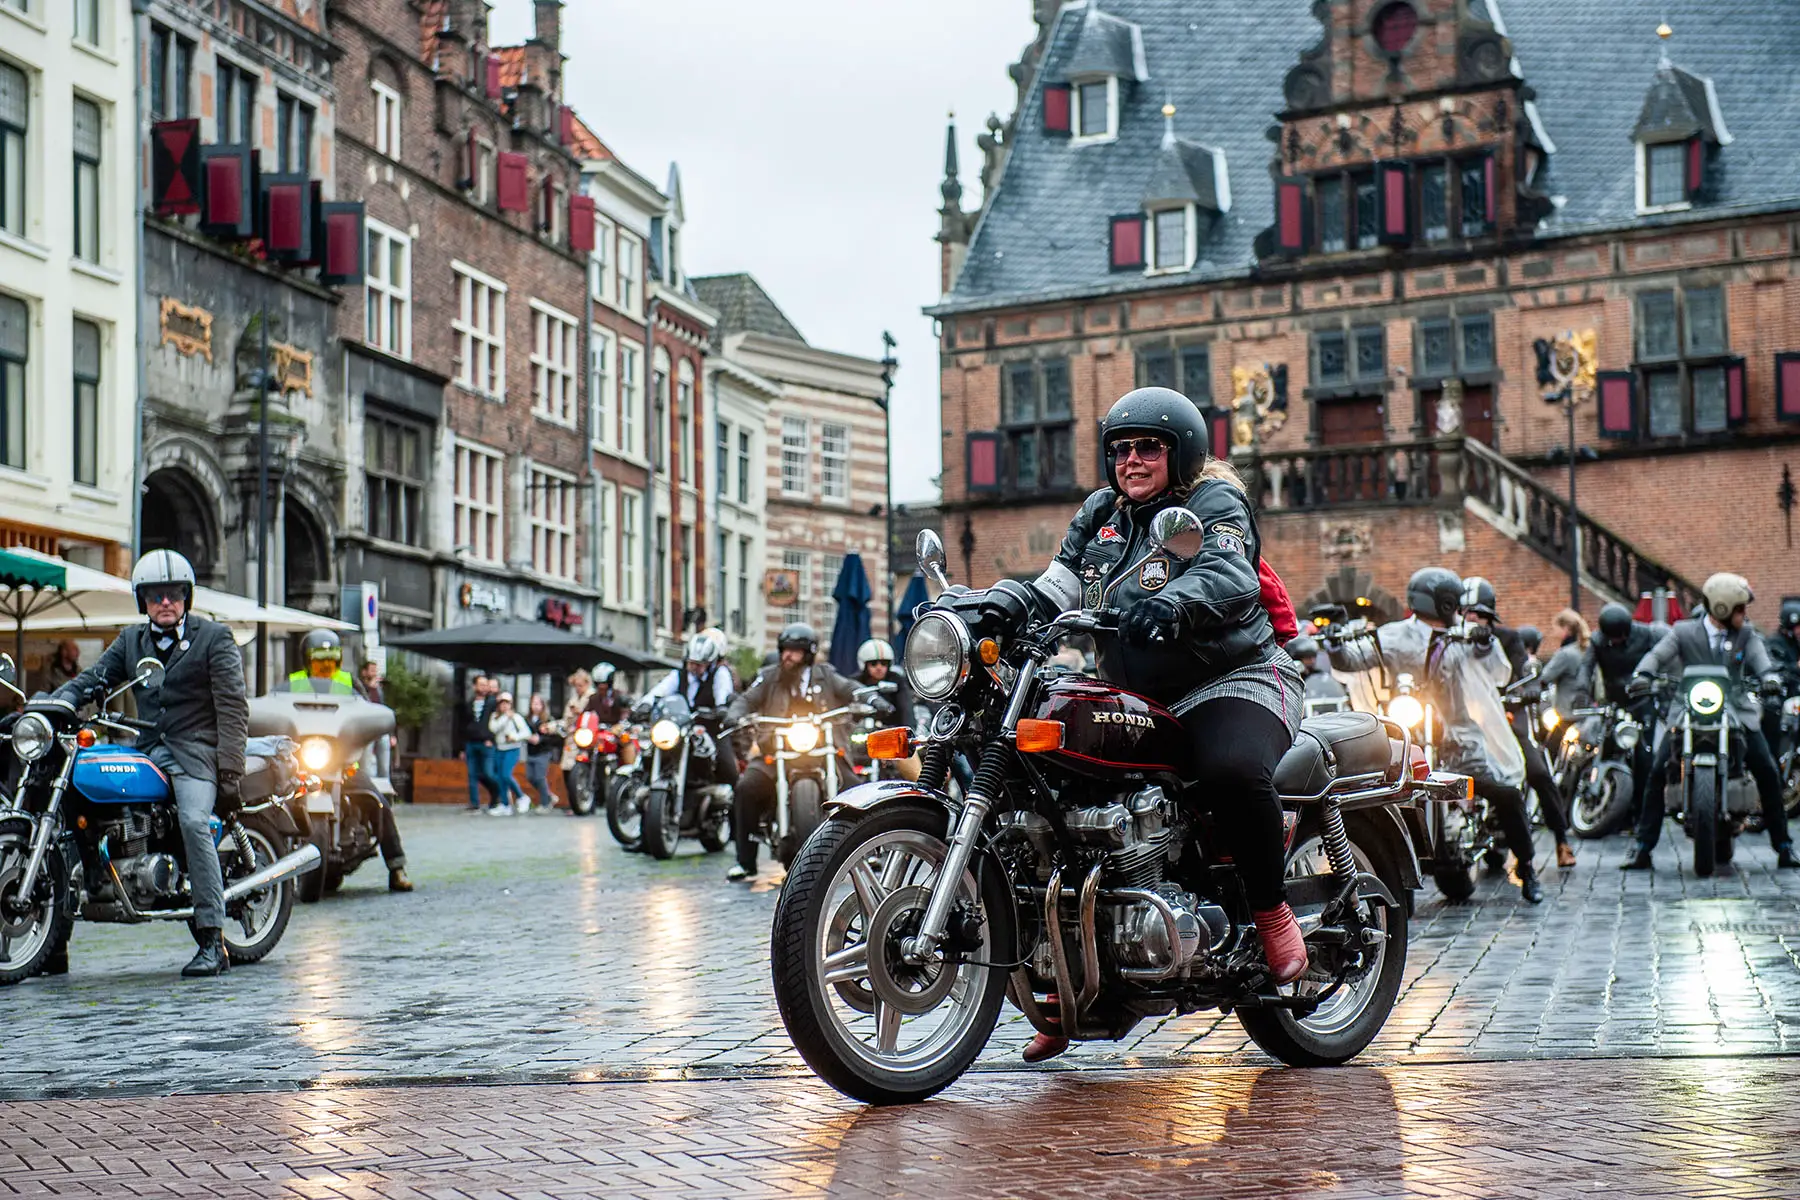 Woman on a motorcycle during the 2019 Distinguished Gentleman's Ride in Nijmegen, the Netherlands.